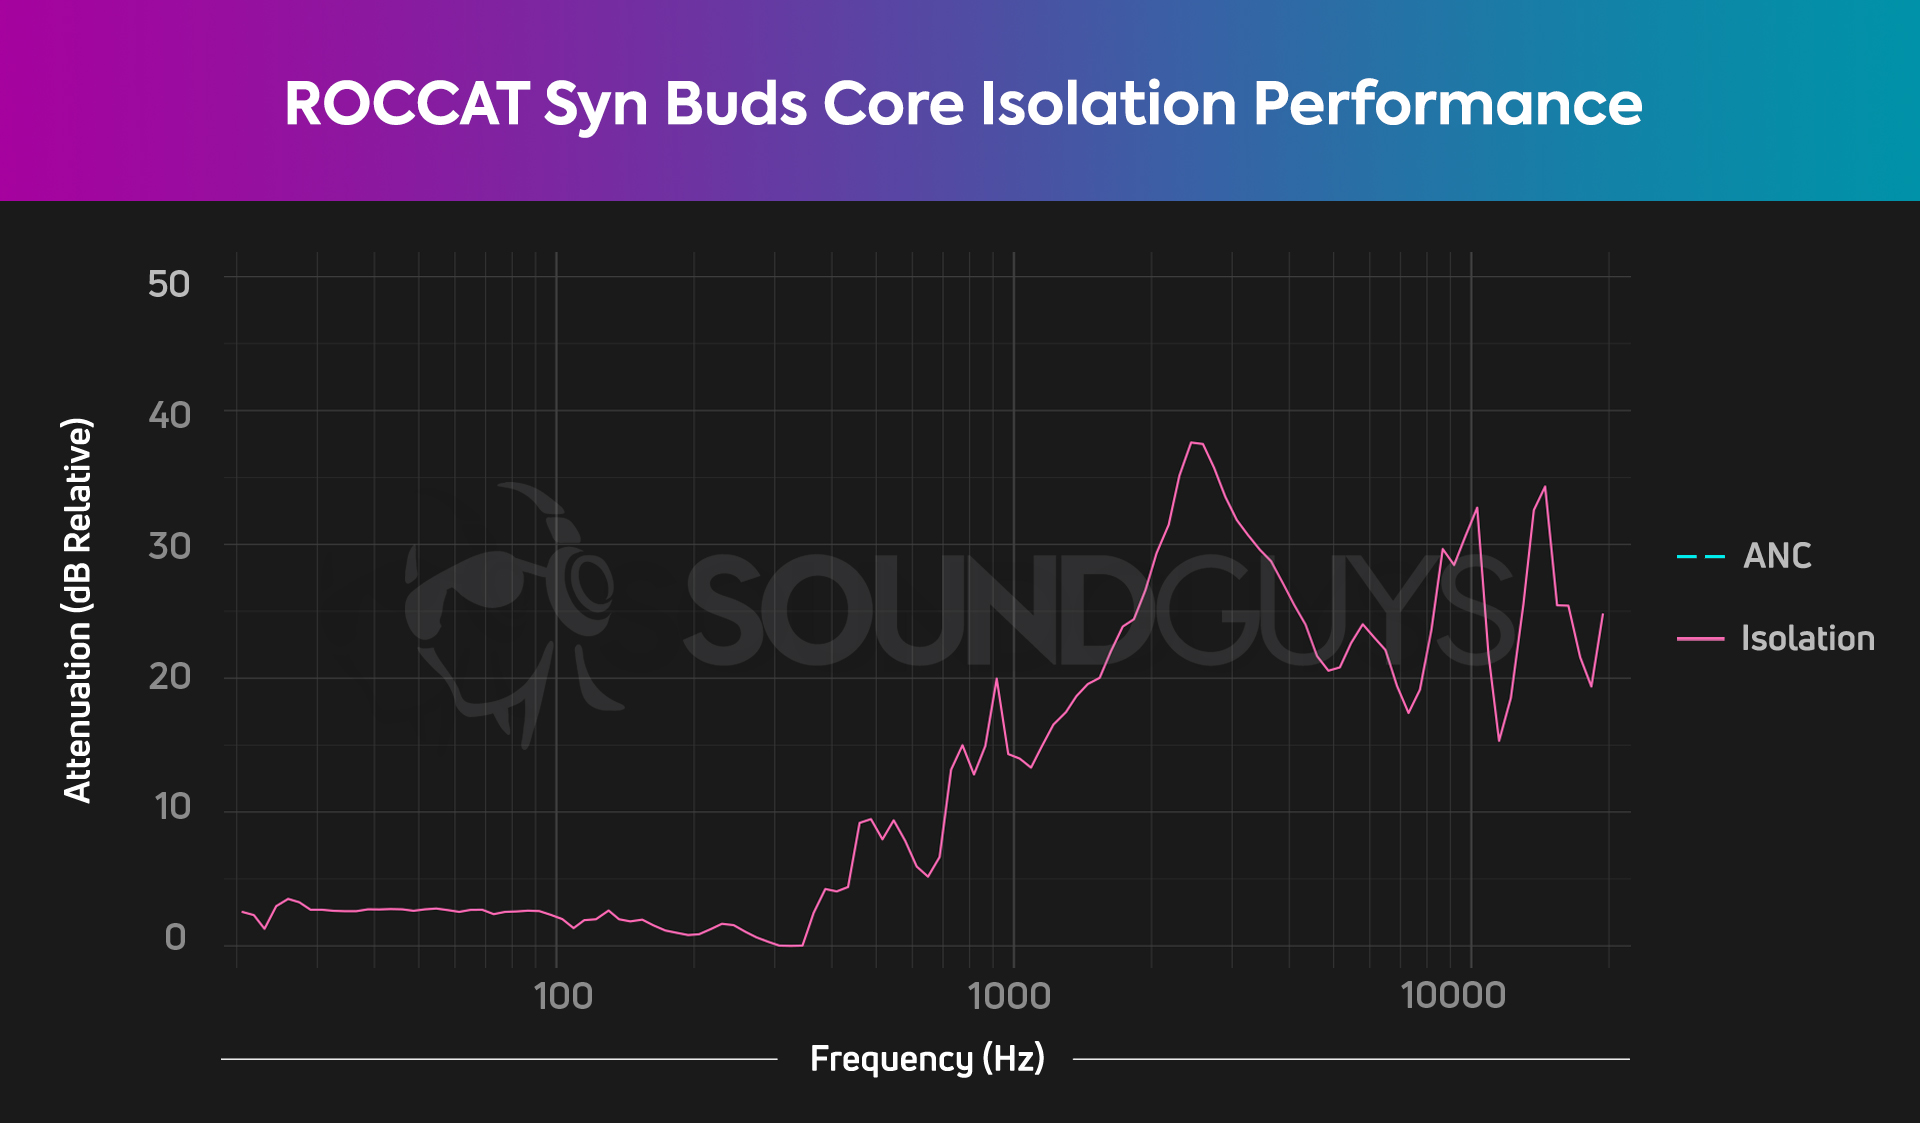 The isolation chart for the ROCCAT Syn Buds Core.